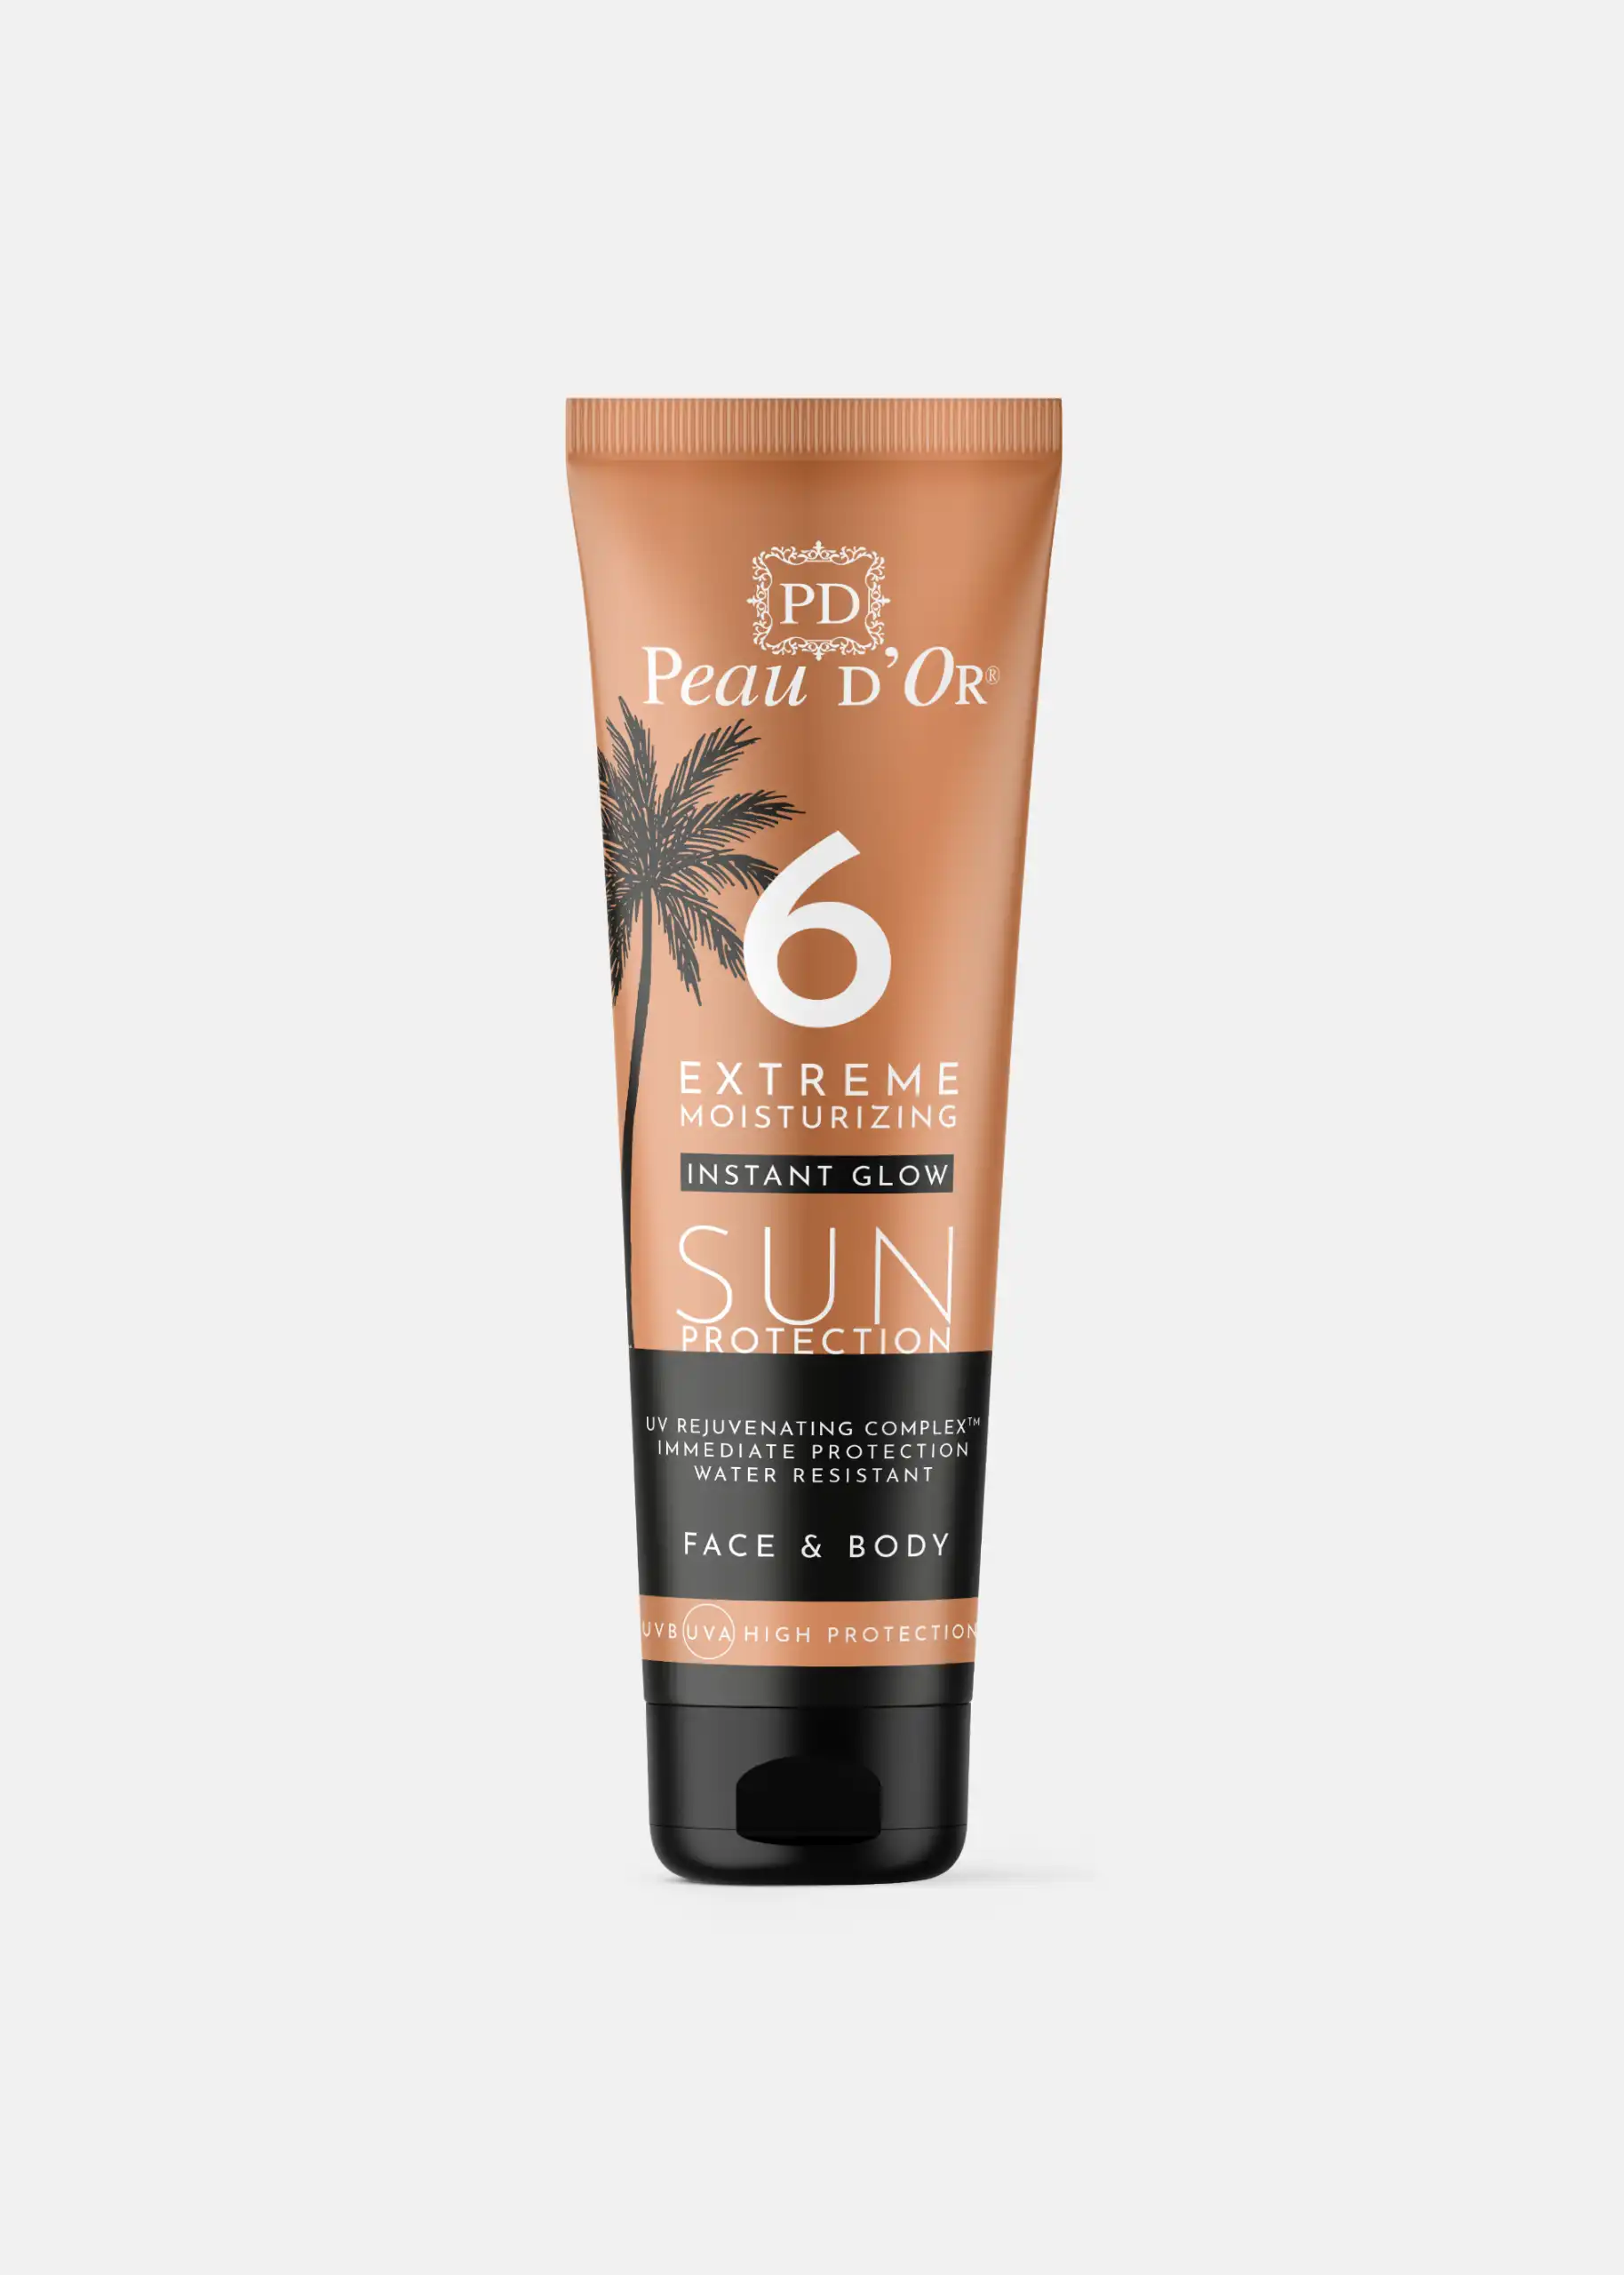 SPF 6 with Instant Glow Peau D'Or